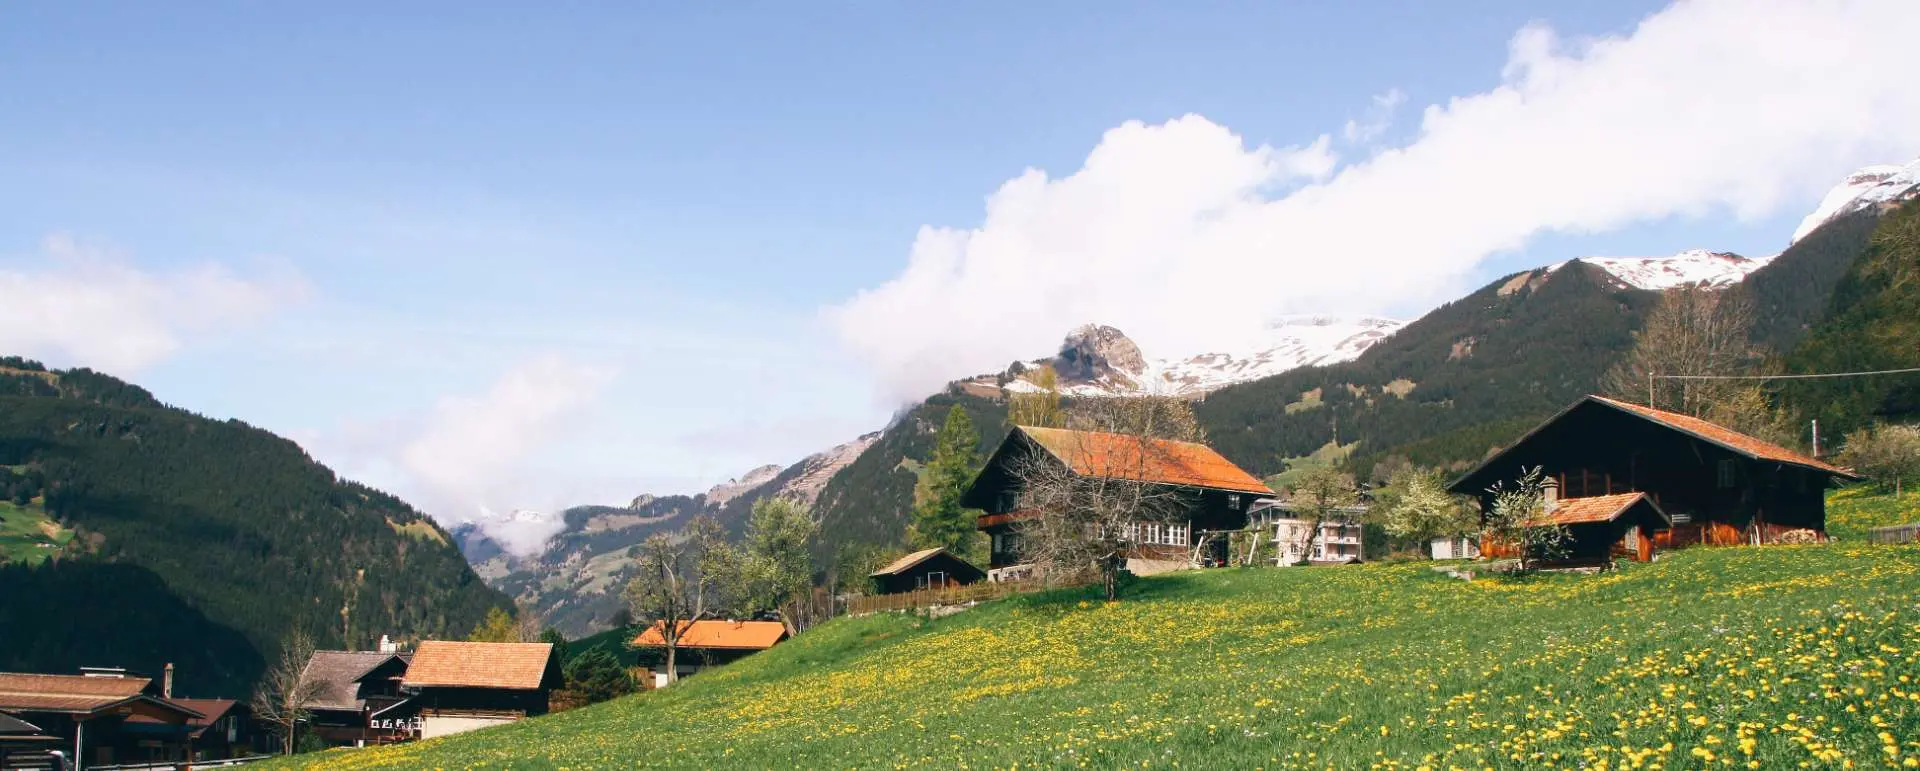 Bernese Highlands - the destination for classes seeking nature experiences